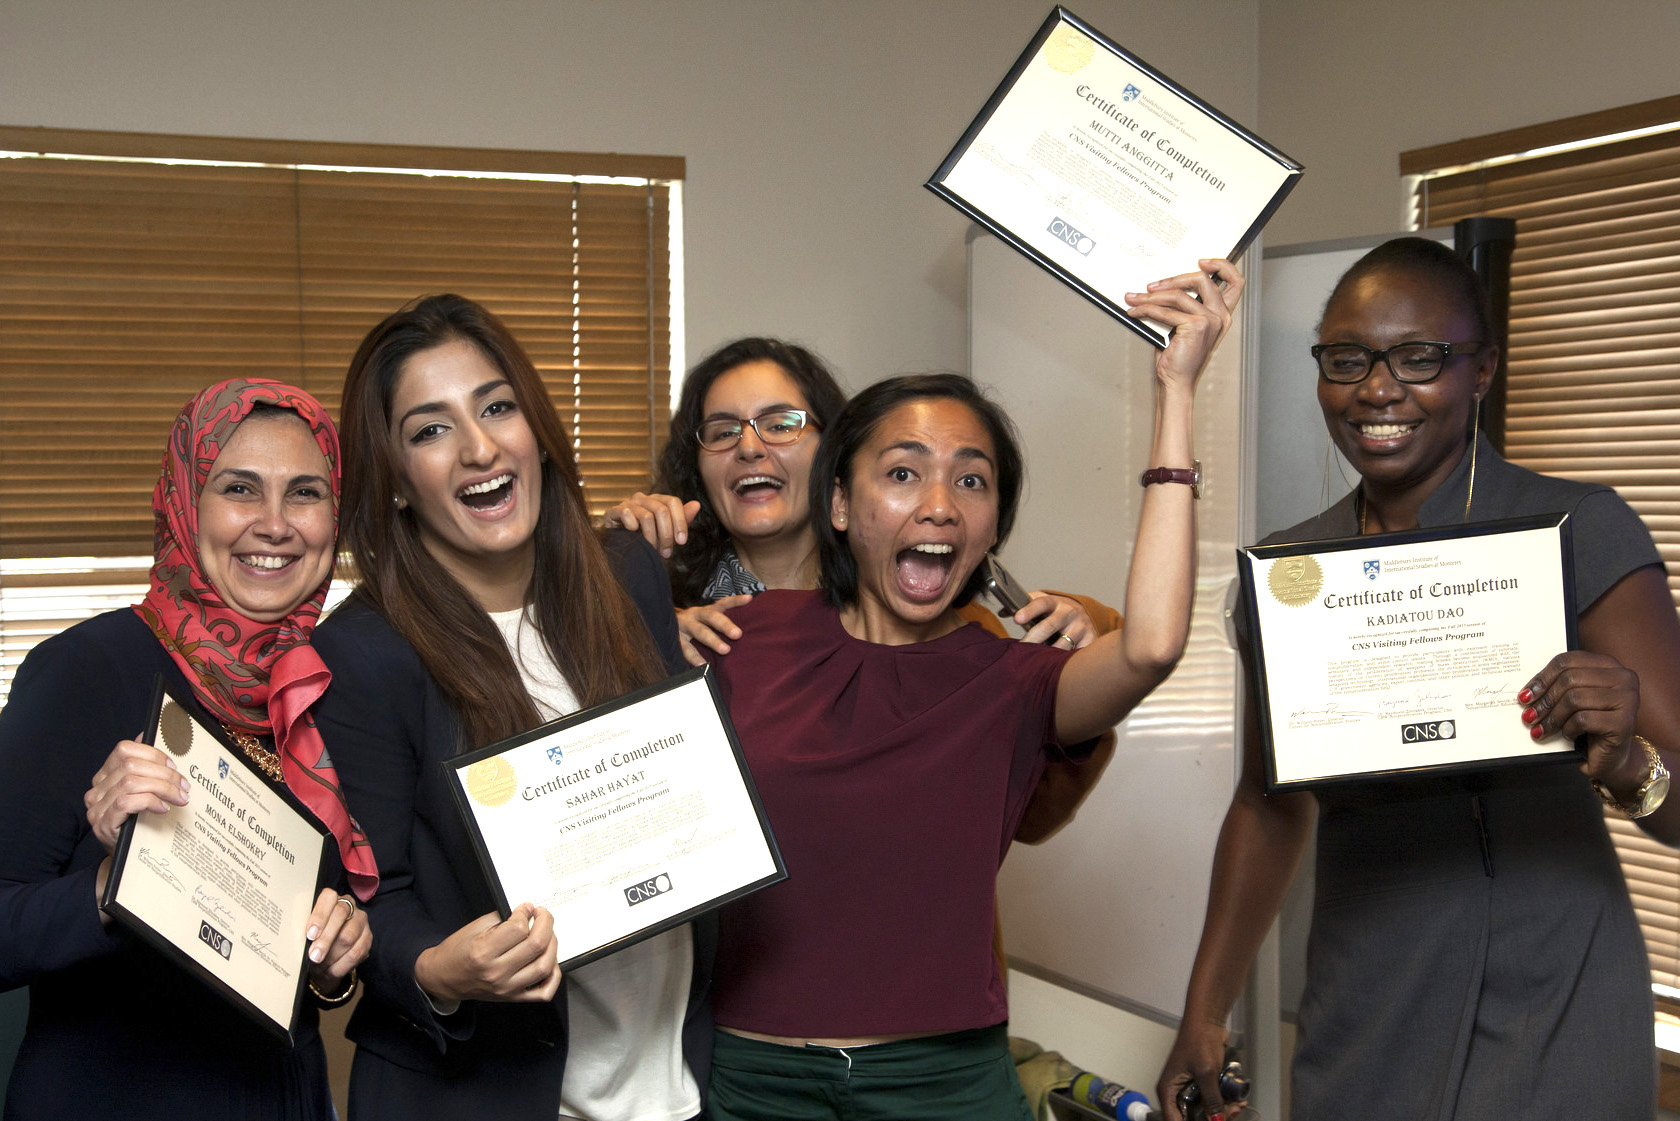 Fall 2015 fellows from Egypt, Pakistan, Indonesia, and Mali proudly display their program completion certificates.